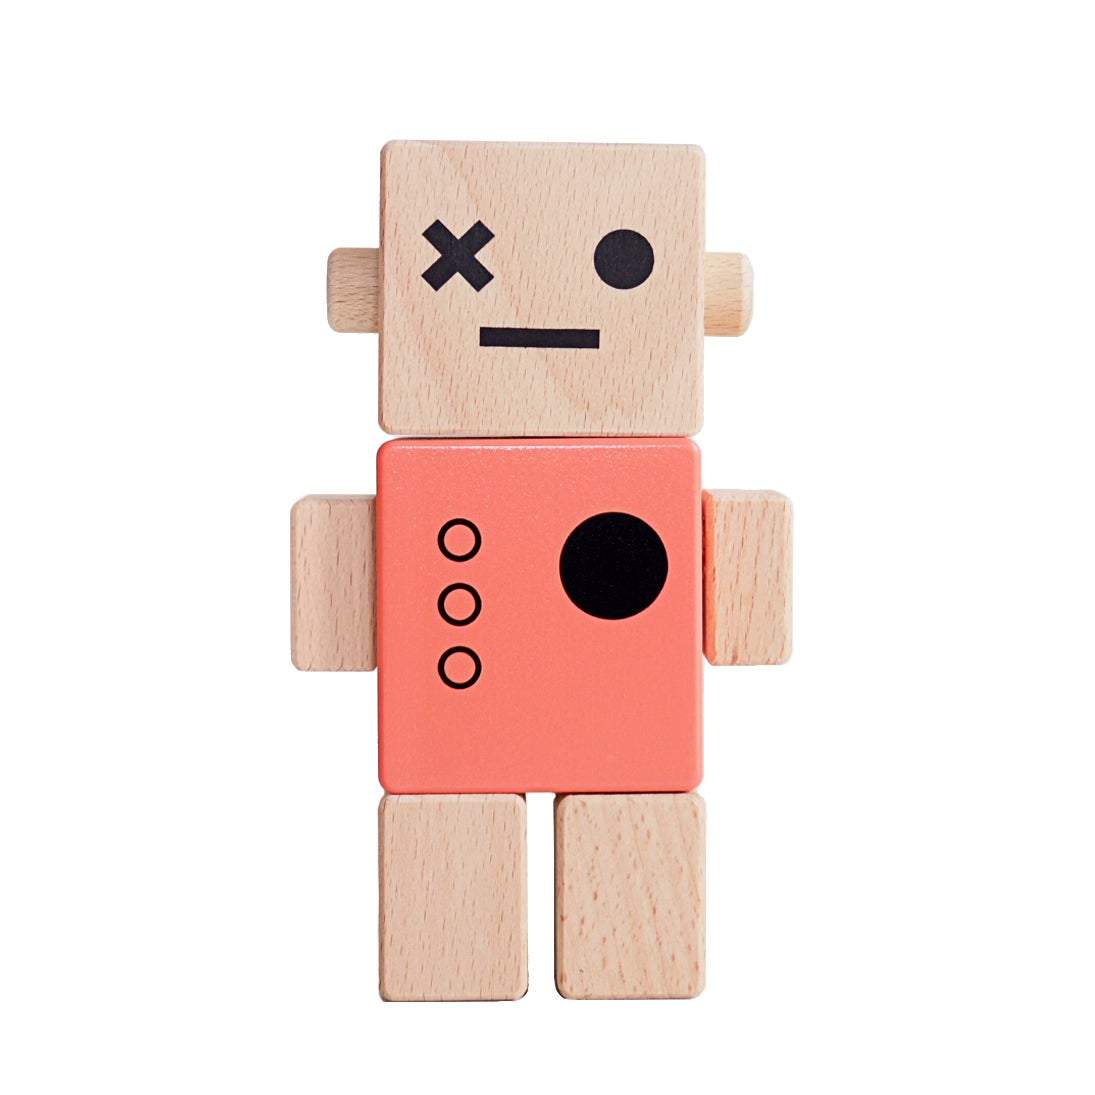 Wooden Robot Coral - thetinycrate